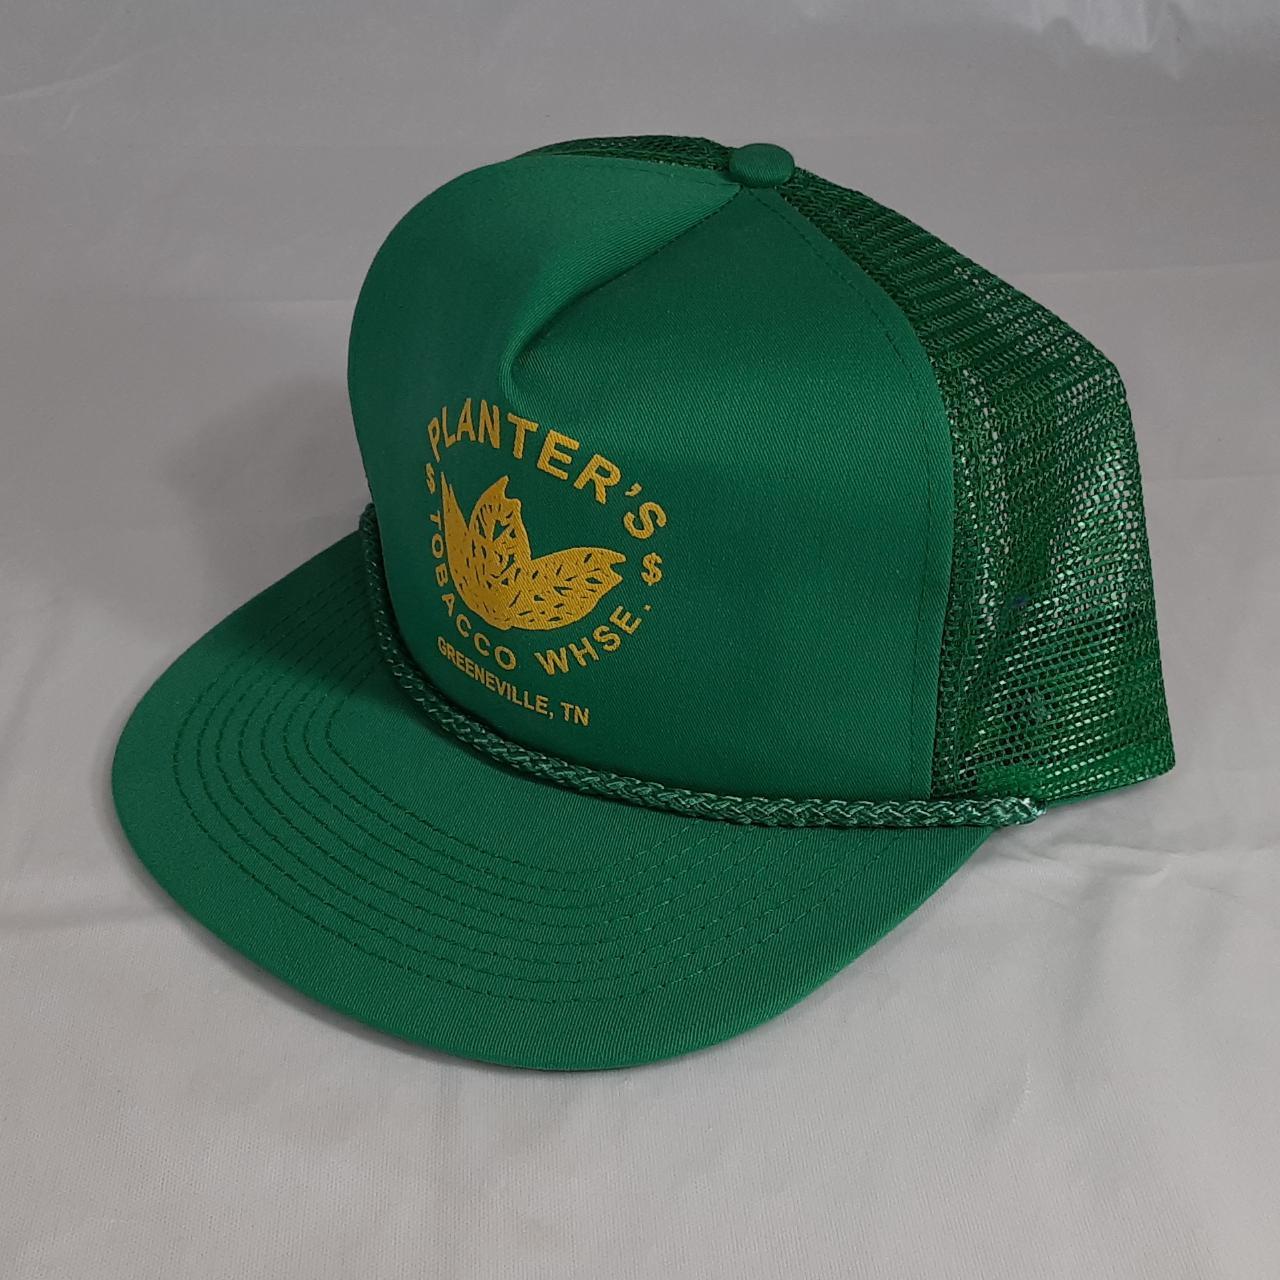 Product Image 2 - Vintage Planters Tobacco Whse Trucker